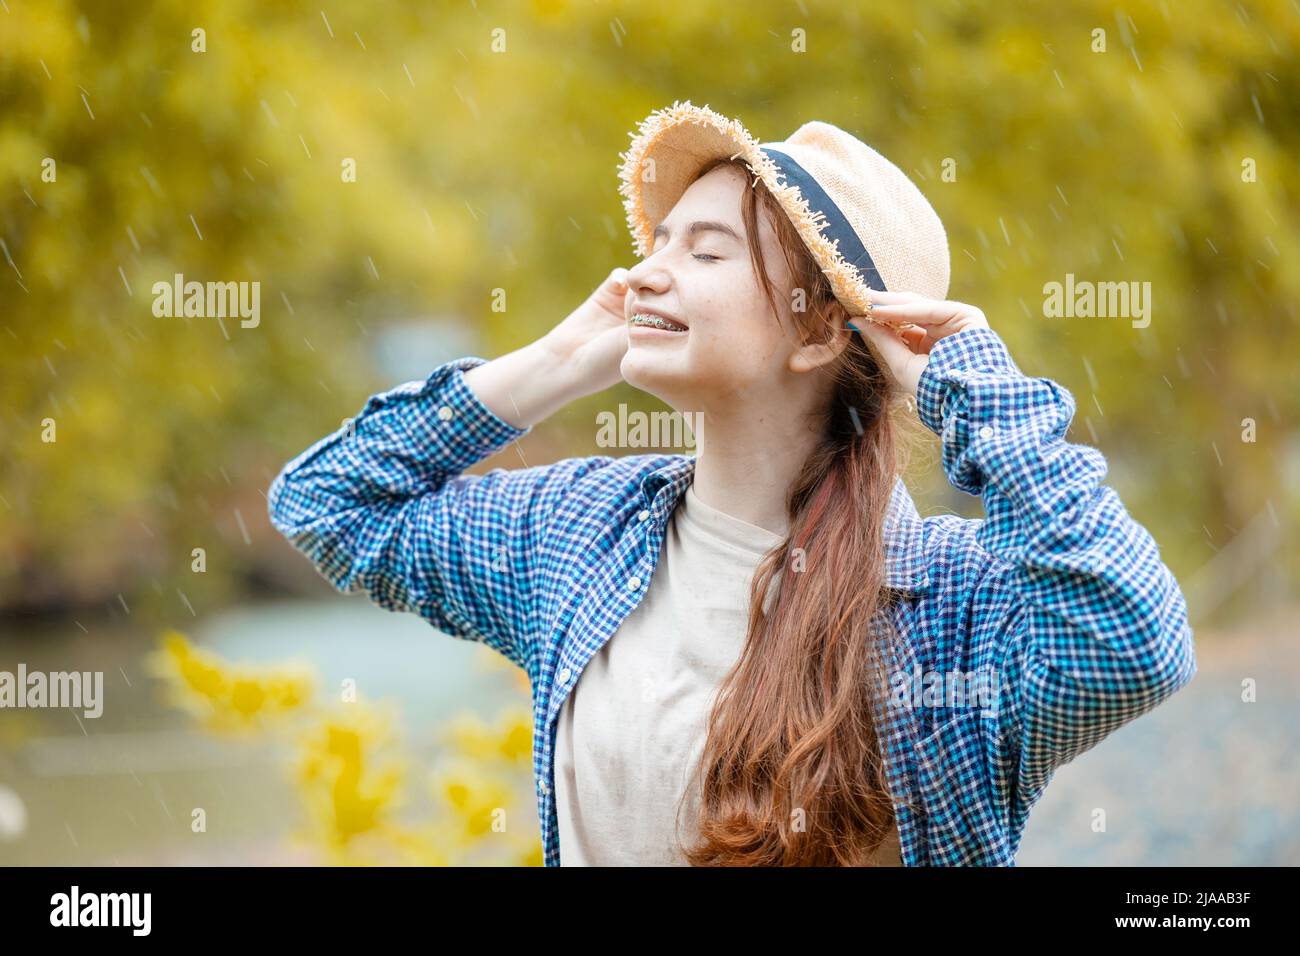 cute young lovely brunette teen girl happy smiling outdoor raining season Stock Photo